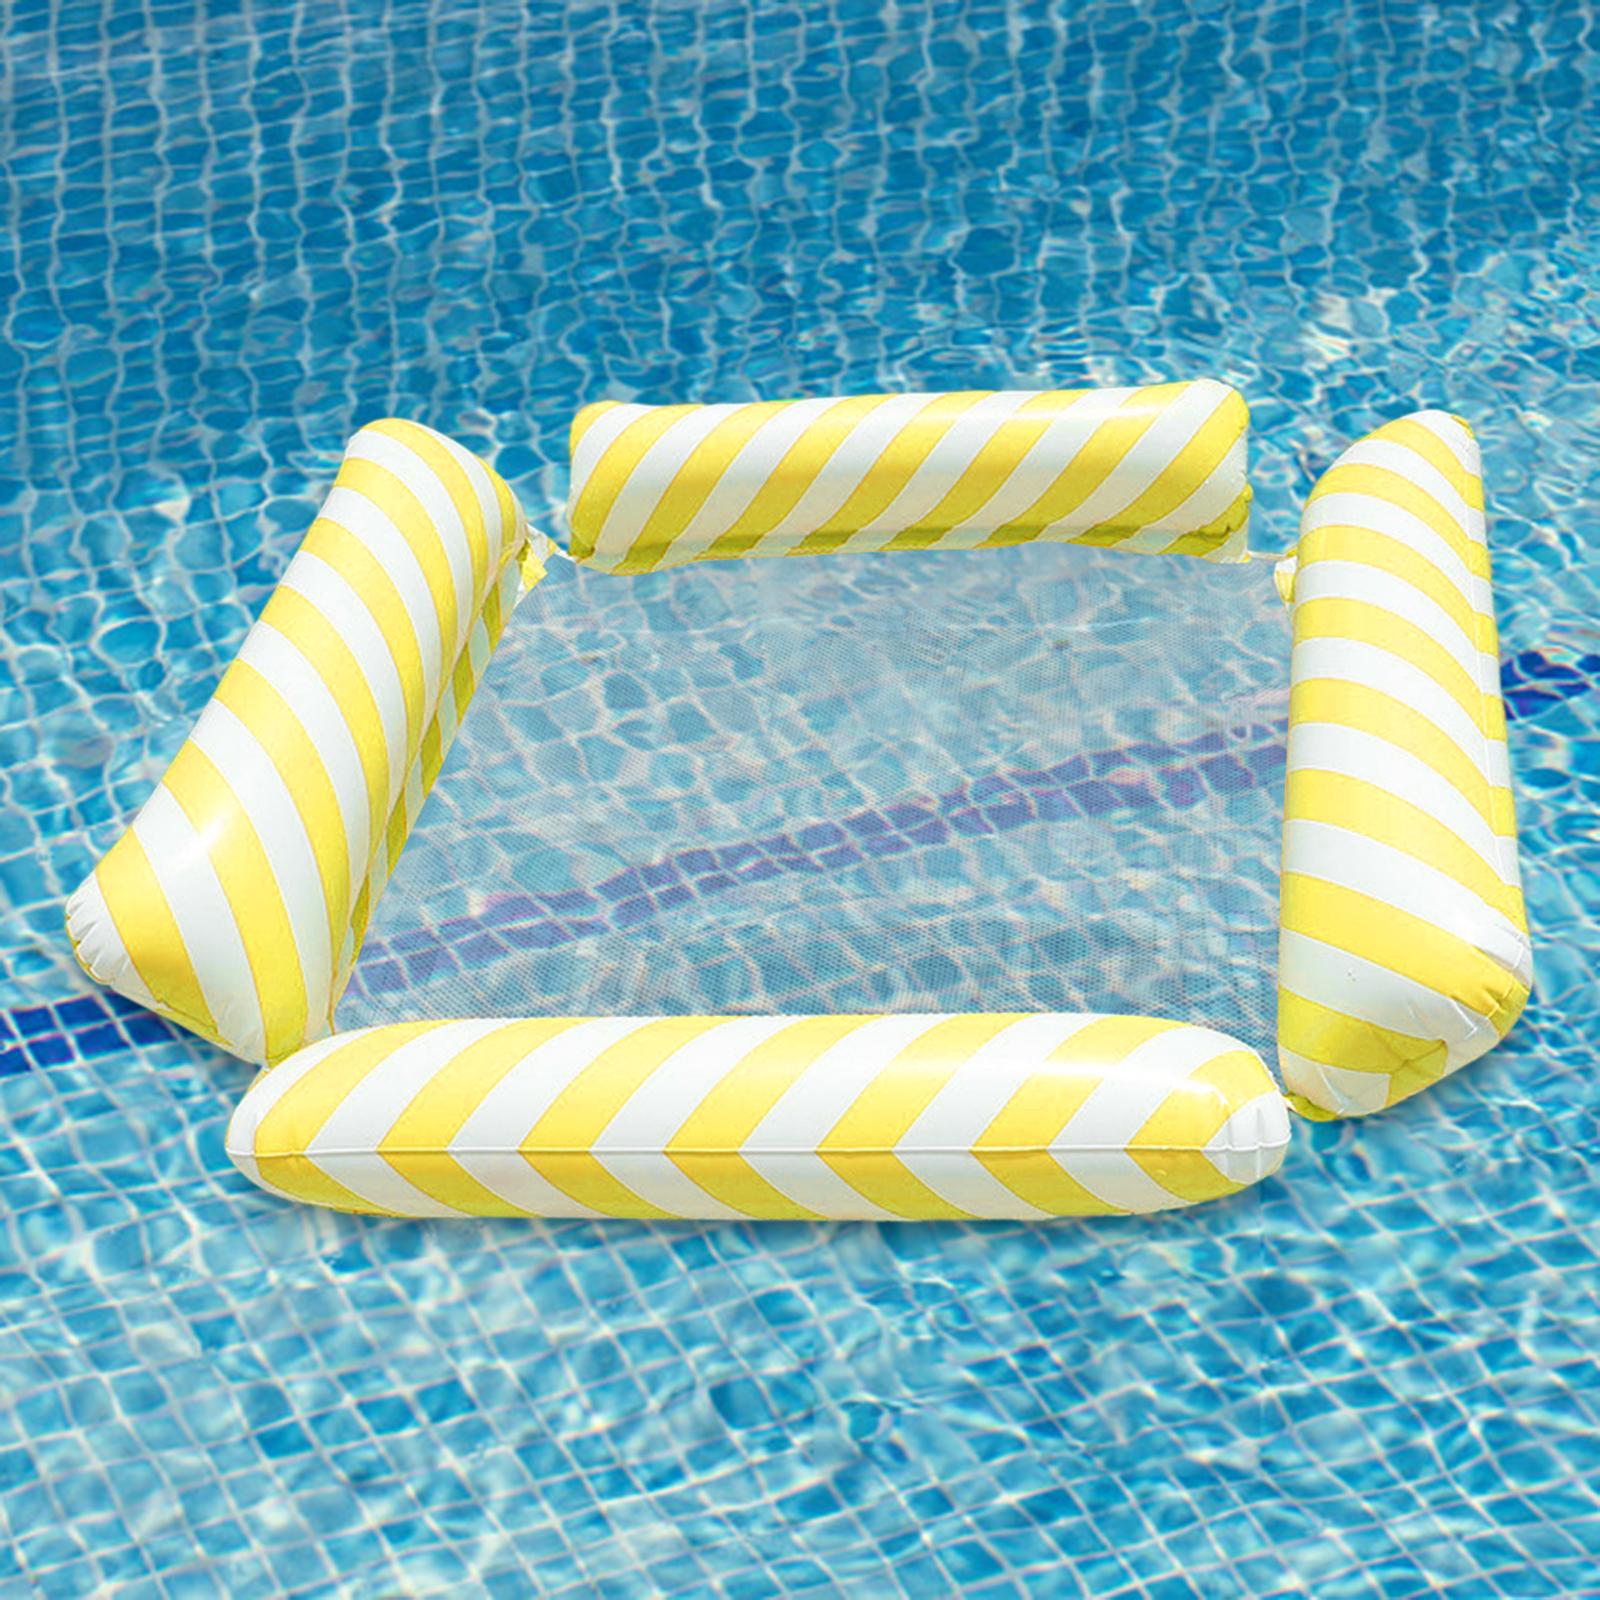 Inflatable Pool Float Hammock Bed for Adults Kids Durable Drifting Water Toy Yellow